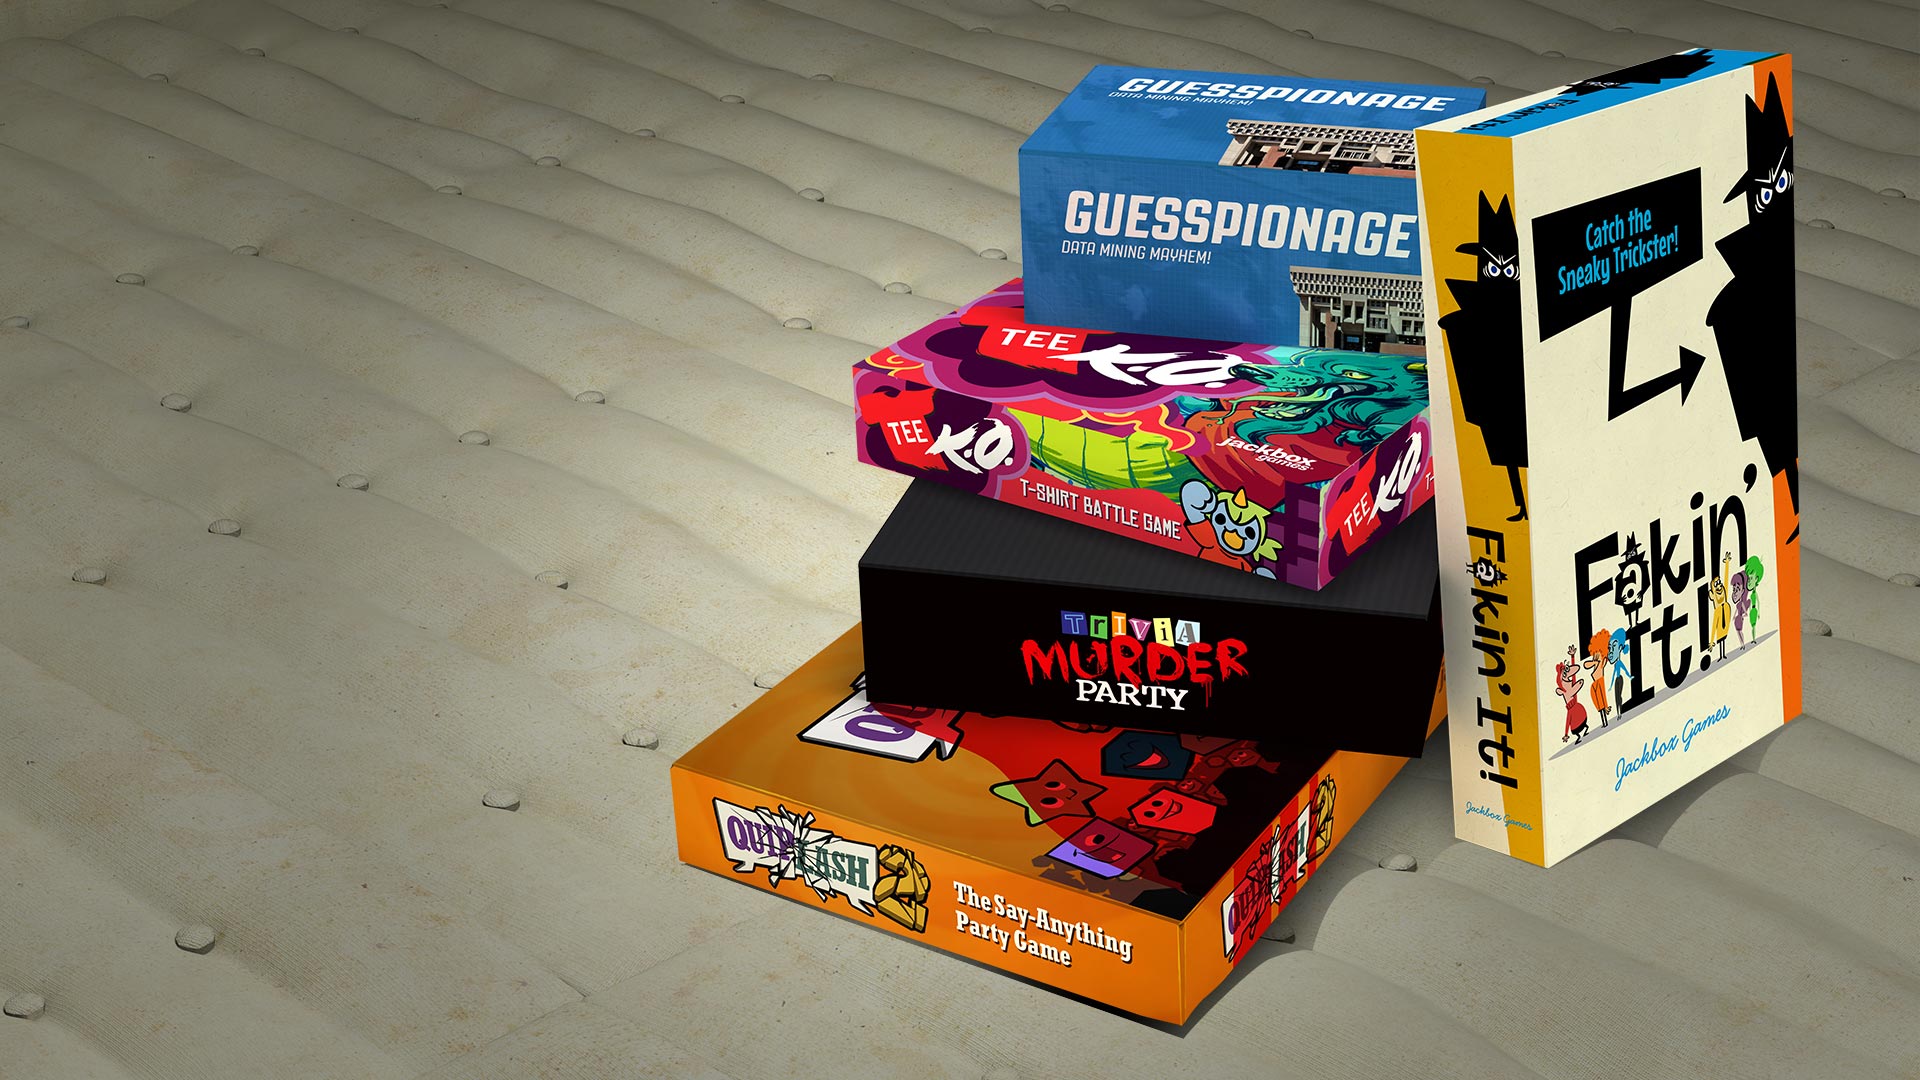 the jackbox party pack 5 download igg